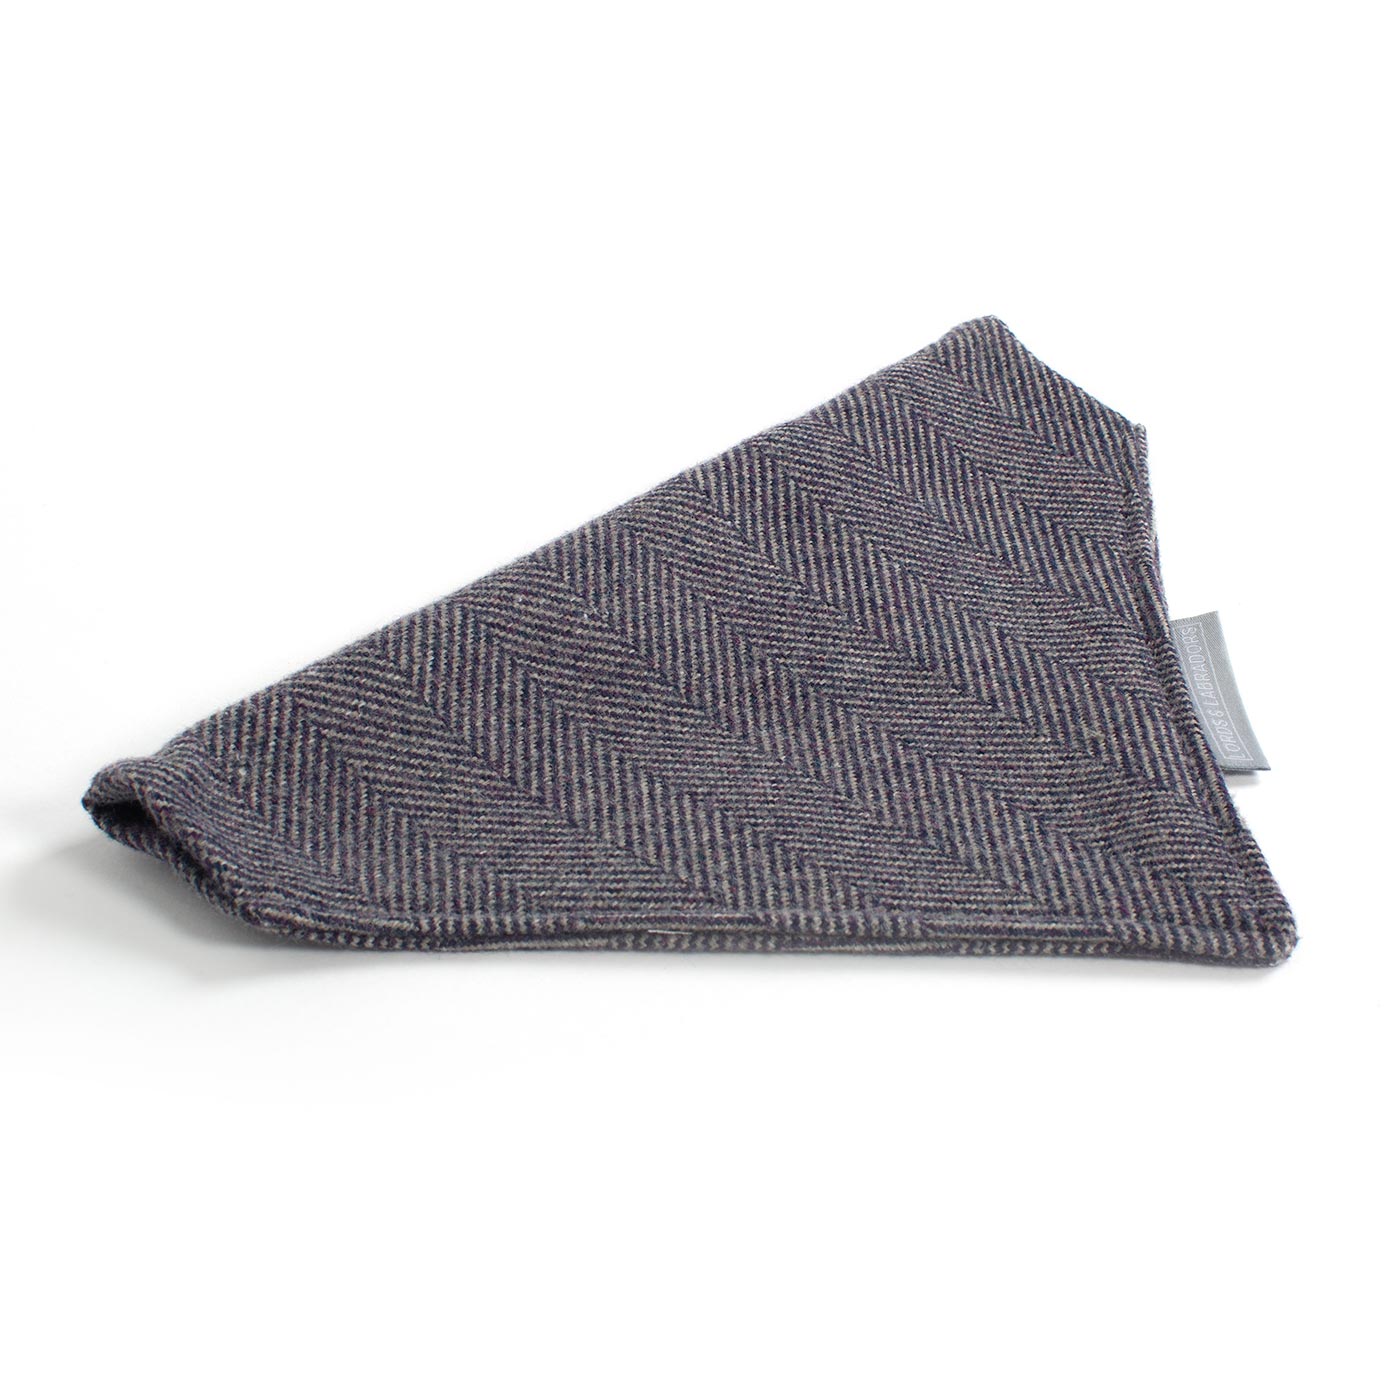 [color:oxford herringbone] Discover The Perfect Bandana For Dogs, Handmade With love In Luxury Herringbone Tweed, Available In 3 Sizes To Personalize Now at Lords & Labradors US